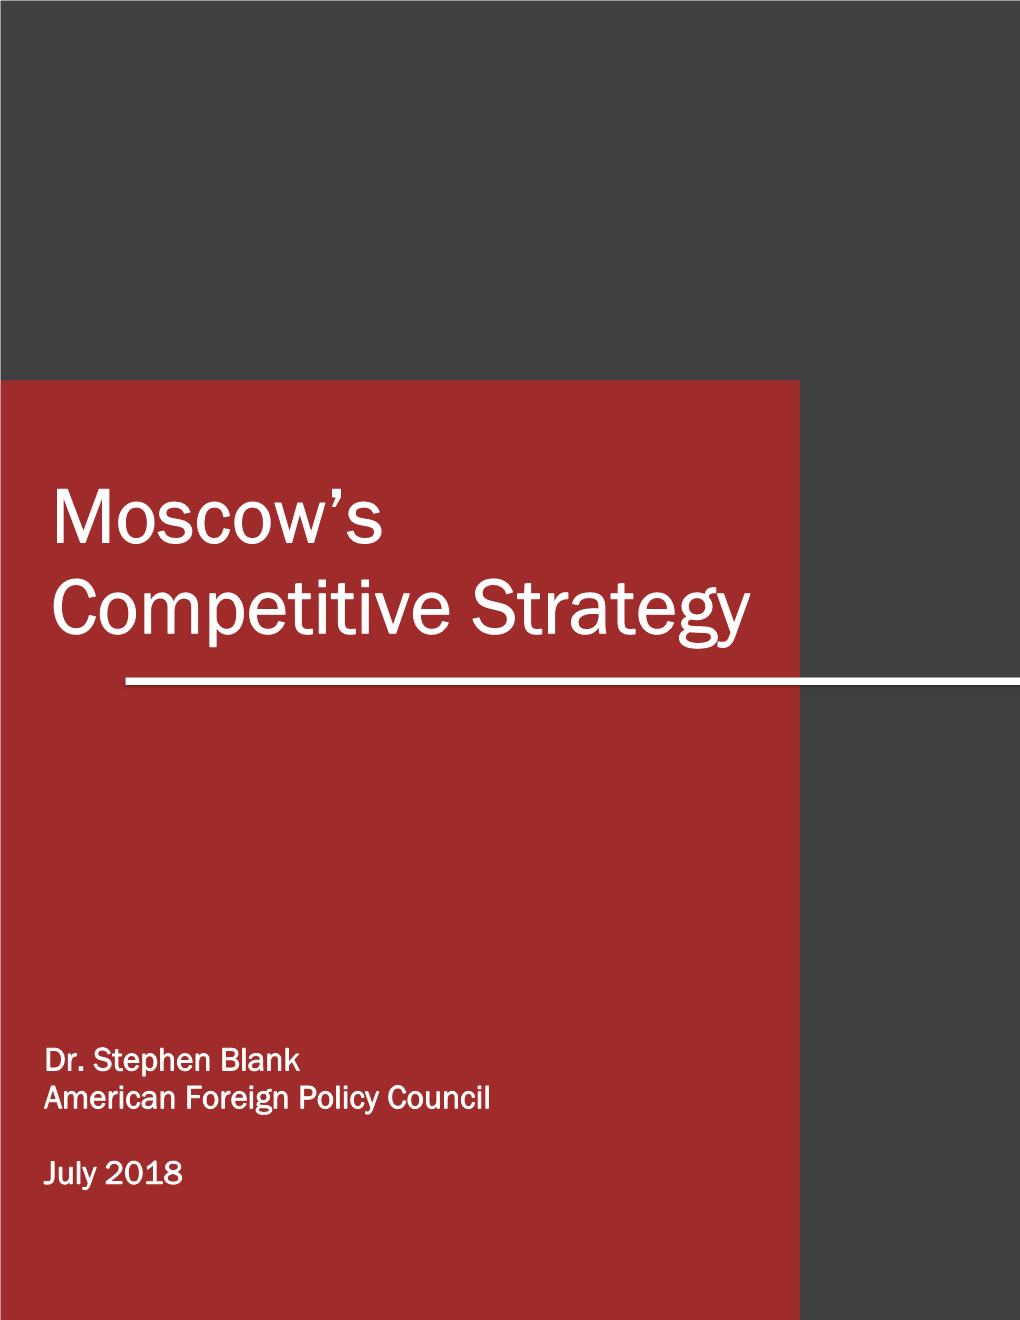 Moscow's Competitive Strategy